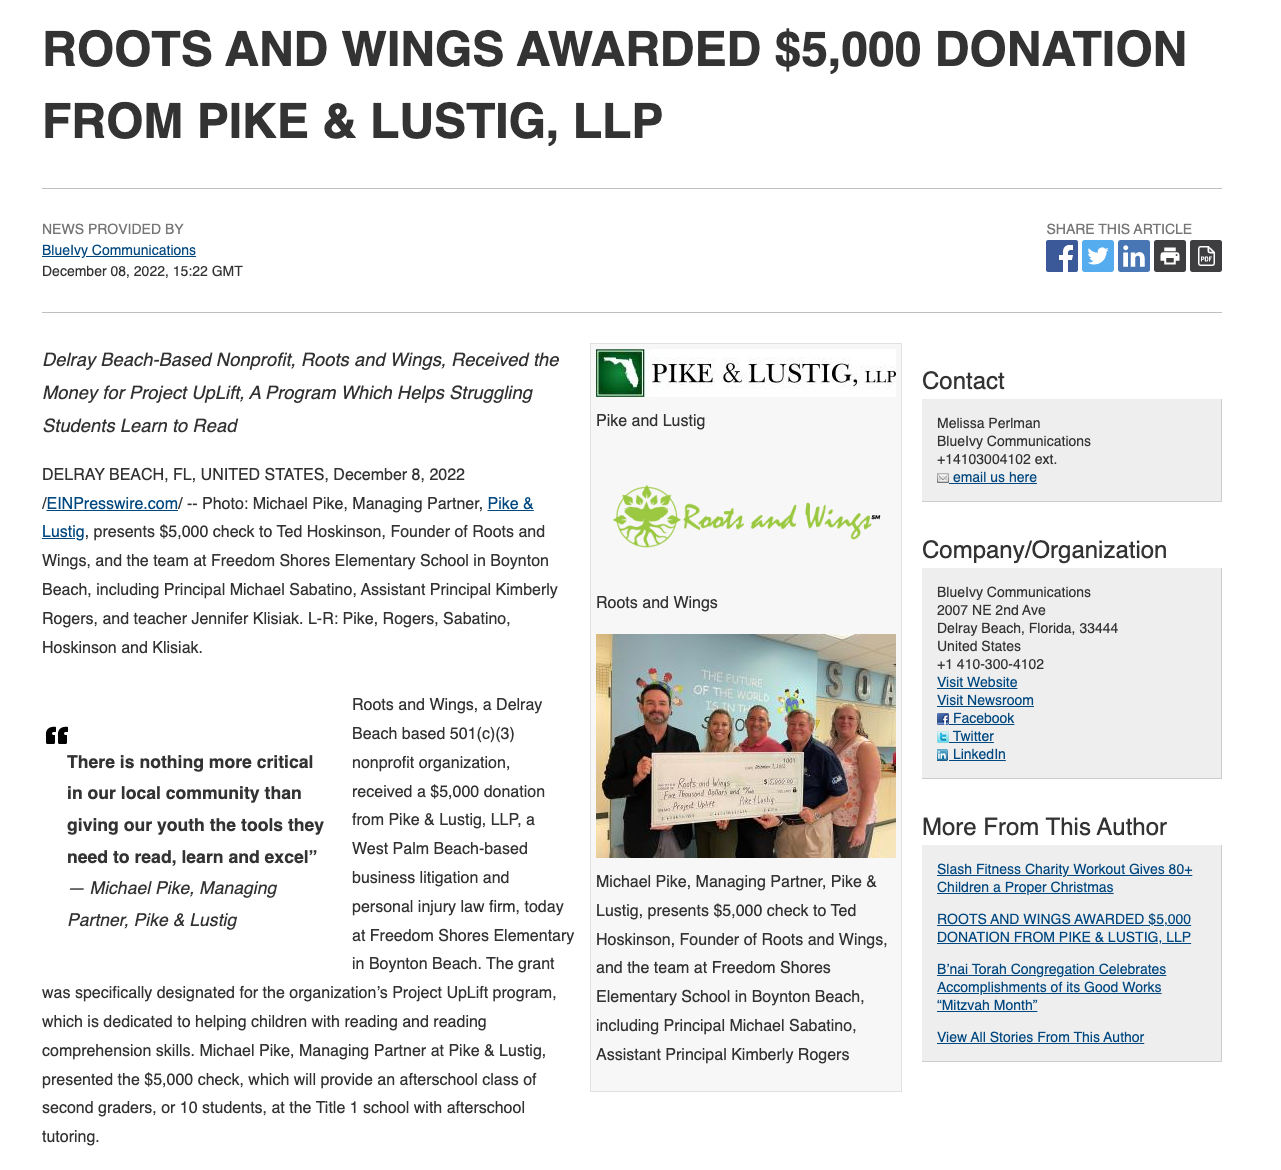 Roots and Wings Awarded $5,000 Donation From Pike & Lustig, LLP